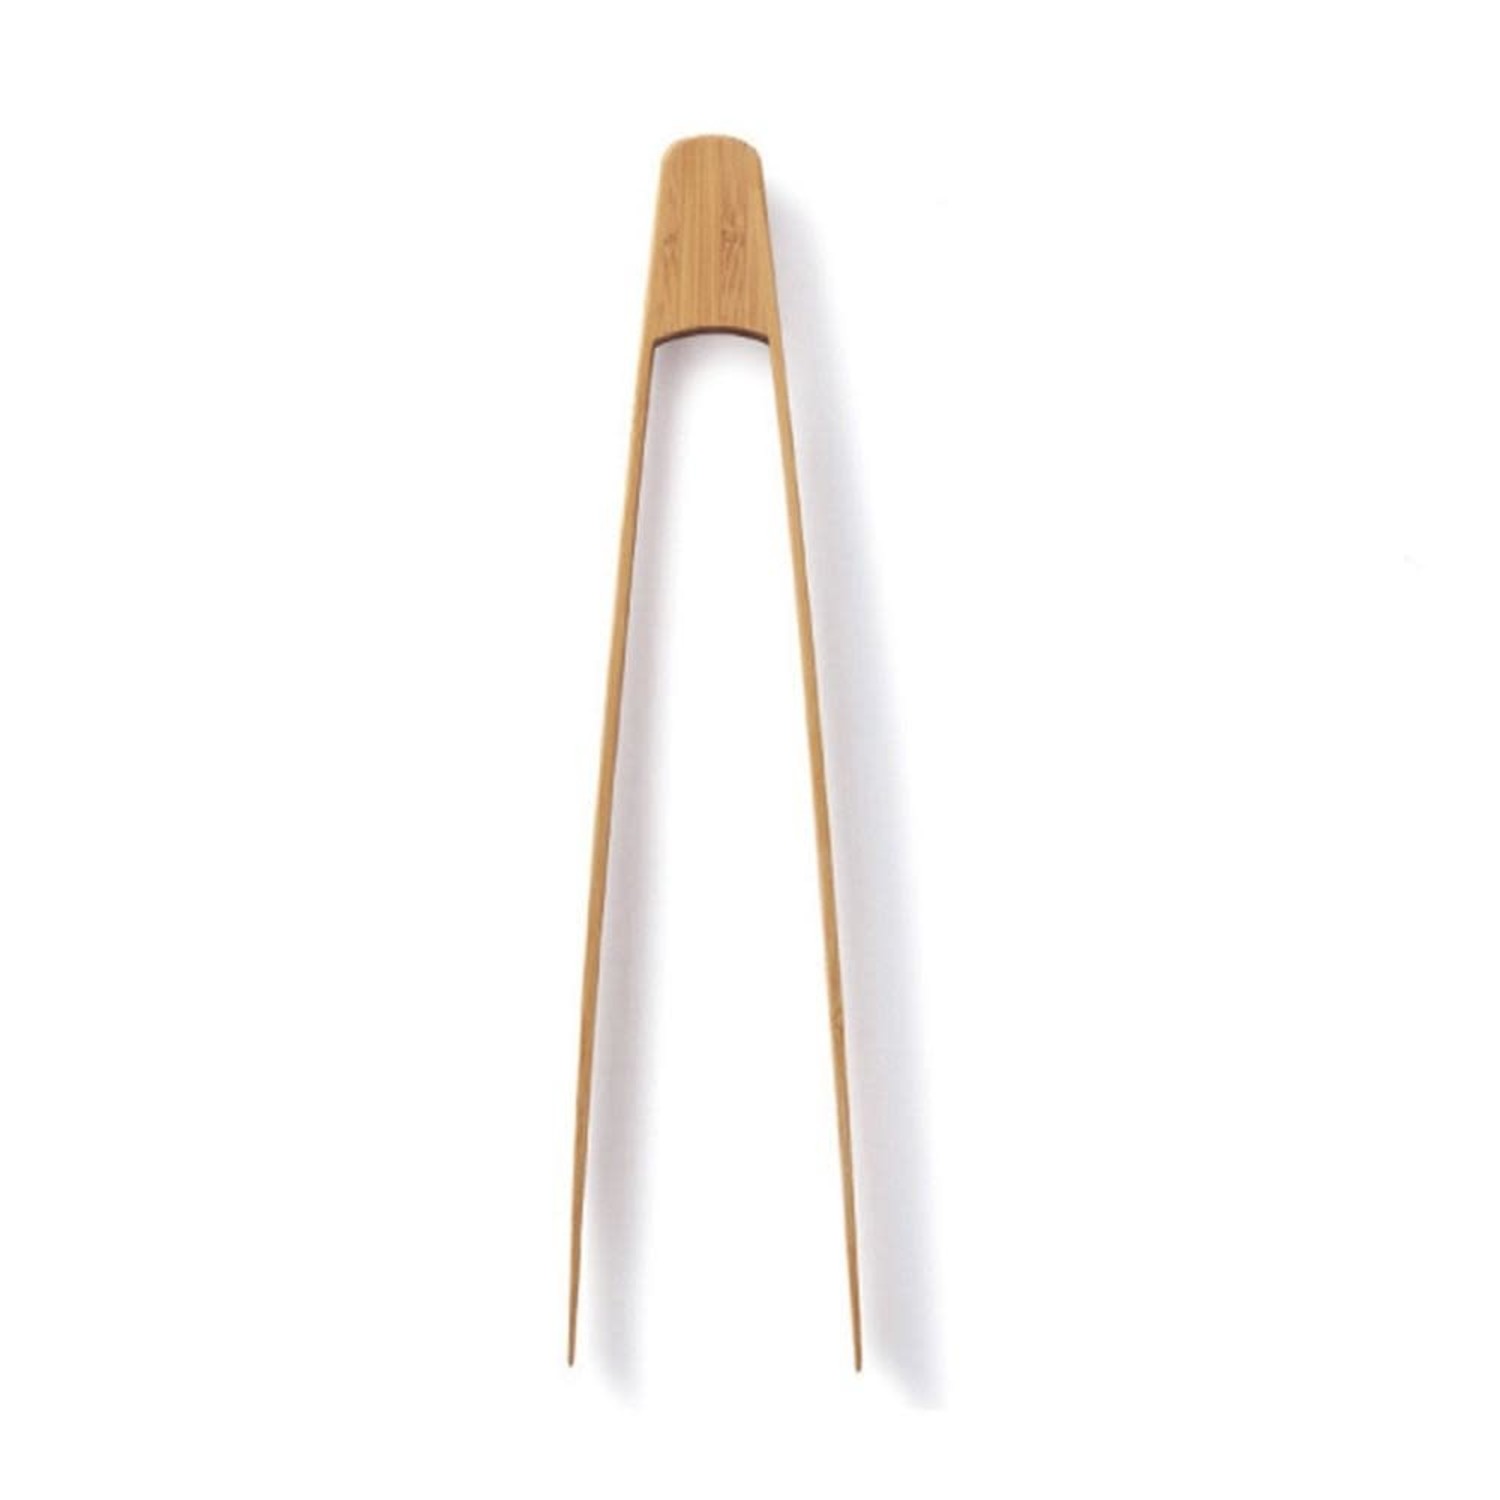 Small Bamboo Tongs set of 12 - Whisk